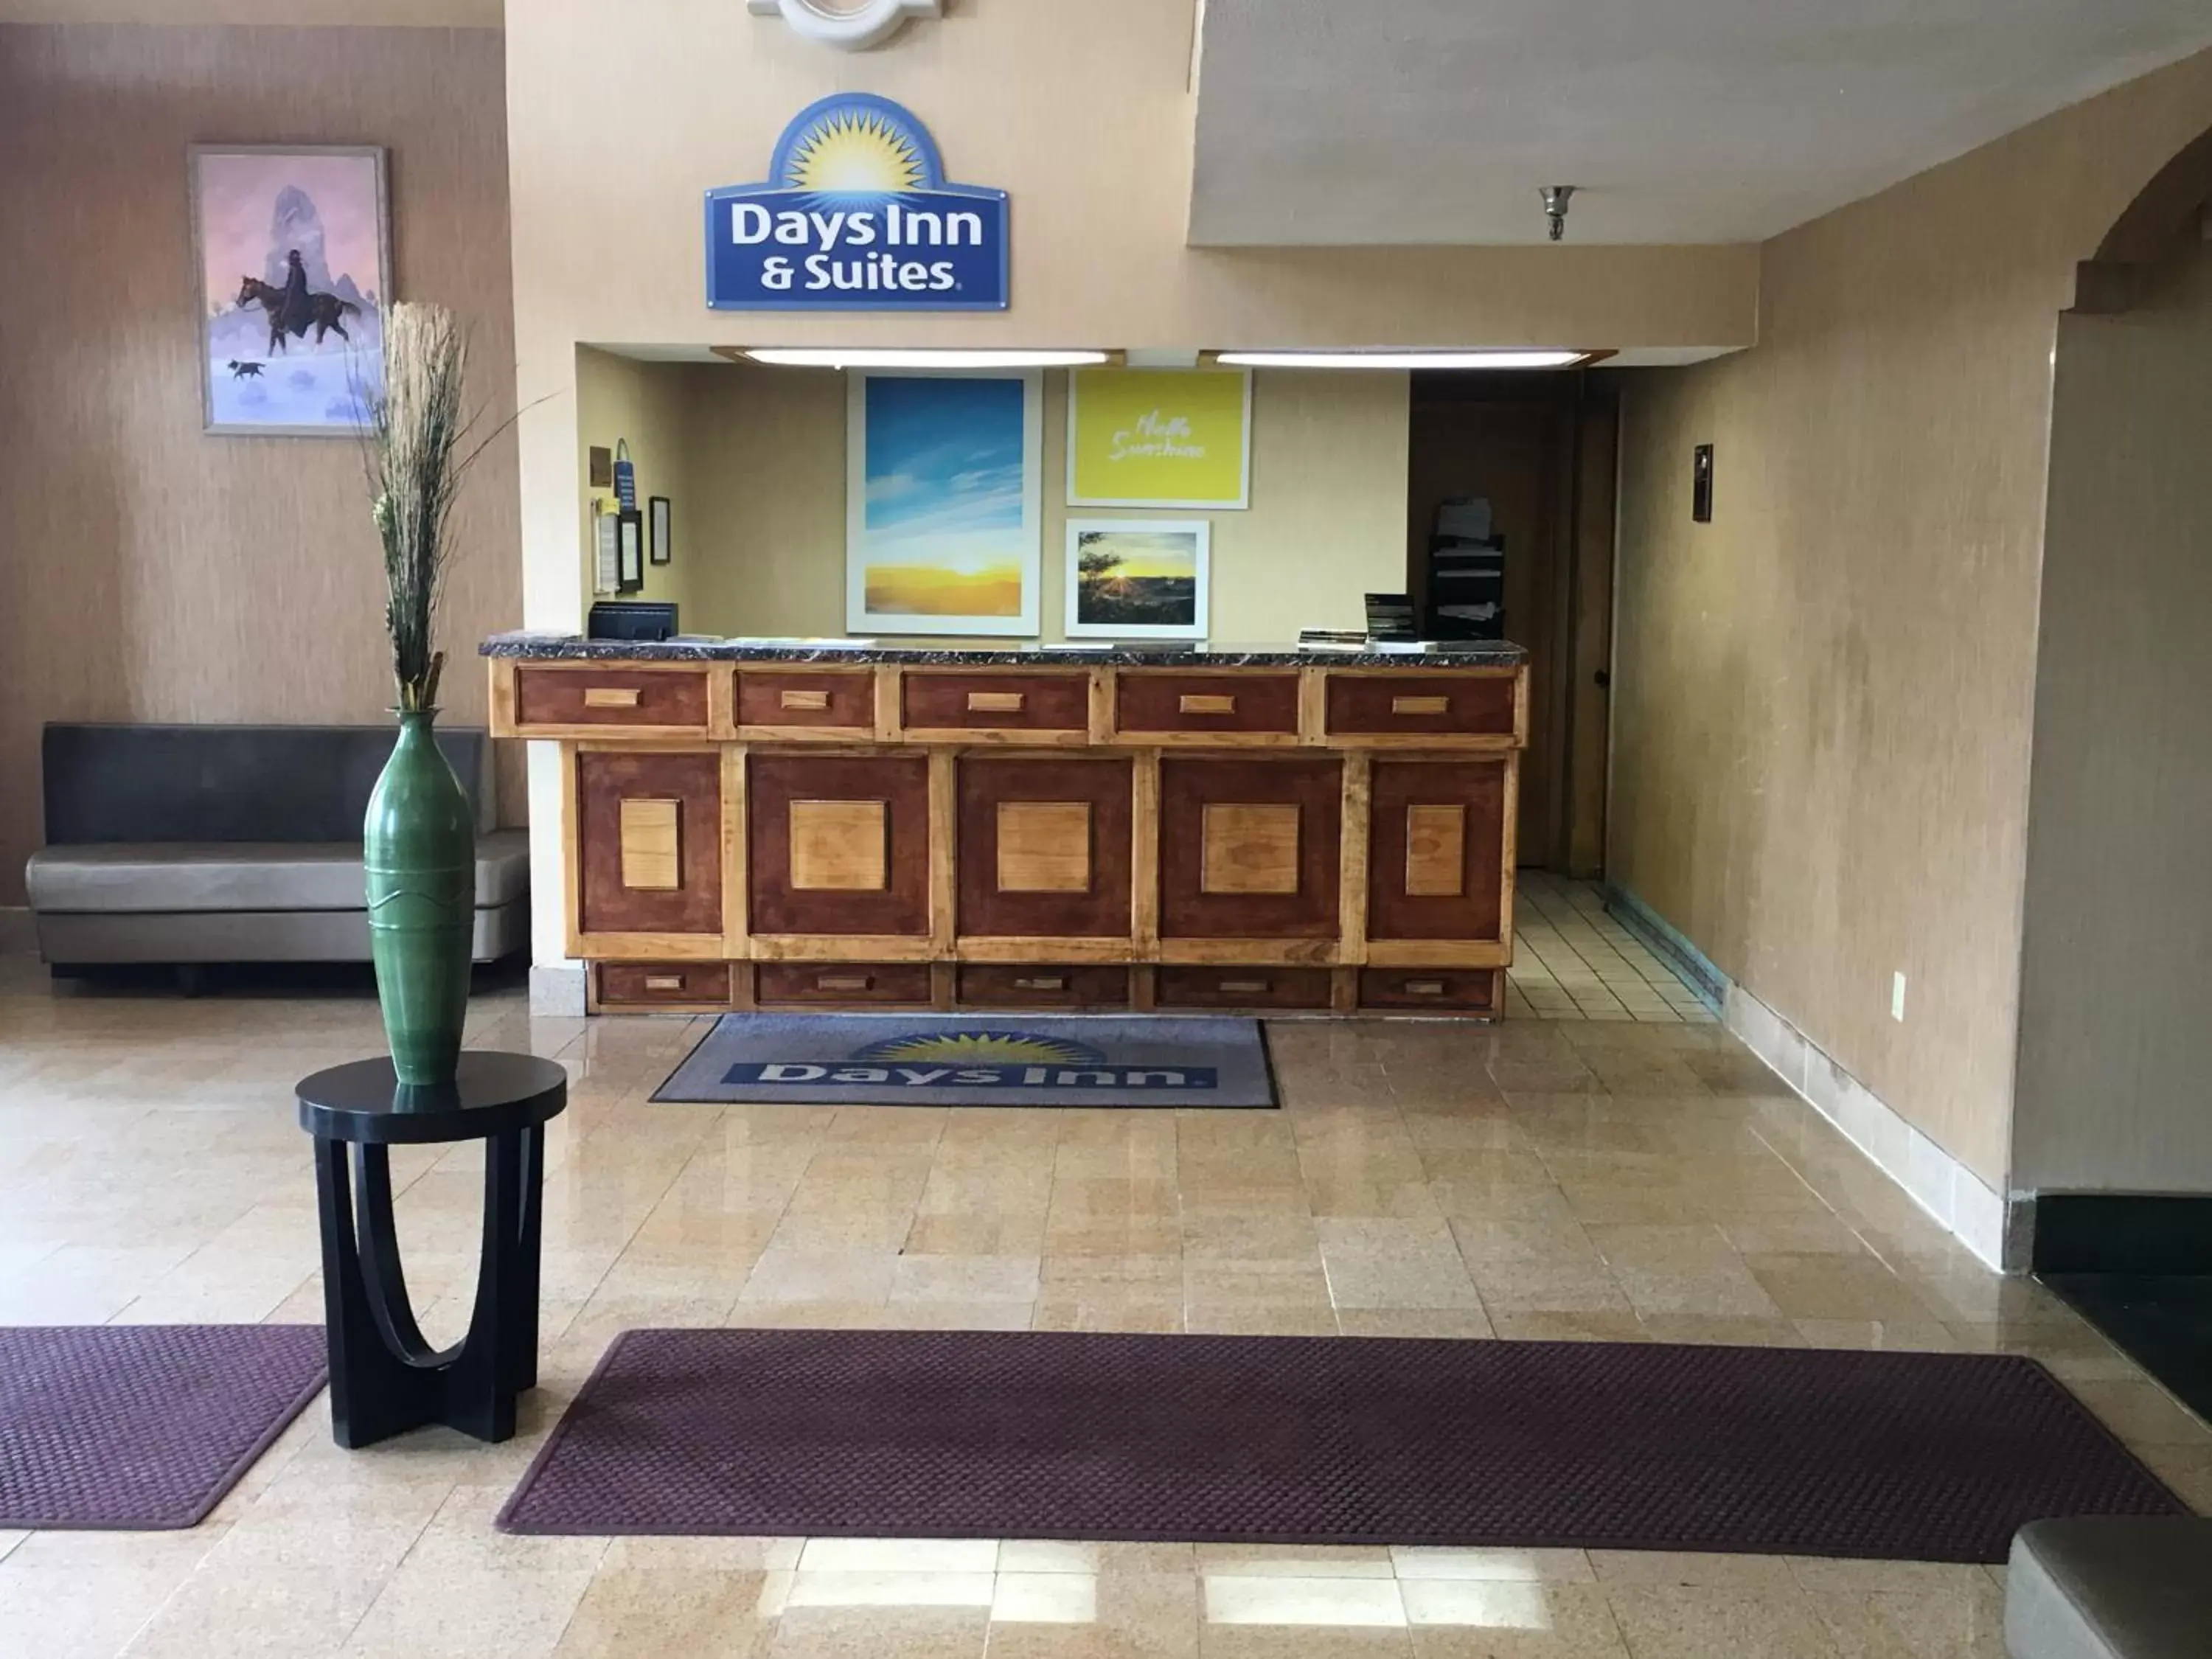 Property building, Lobby/Reception in Days Inn & Suites by Wyndham Red Rock-Gallup